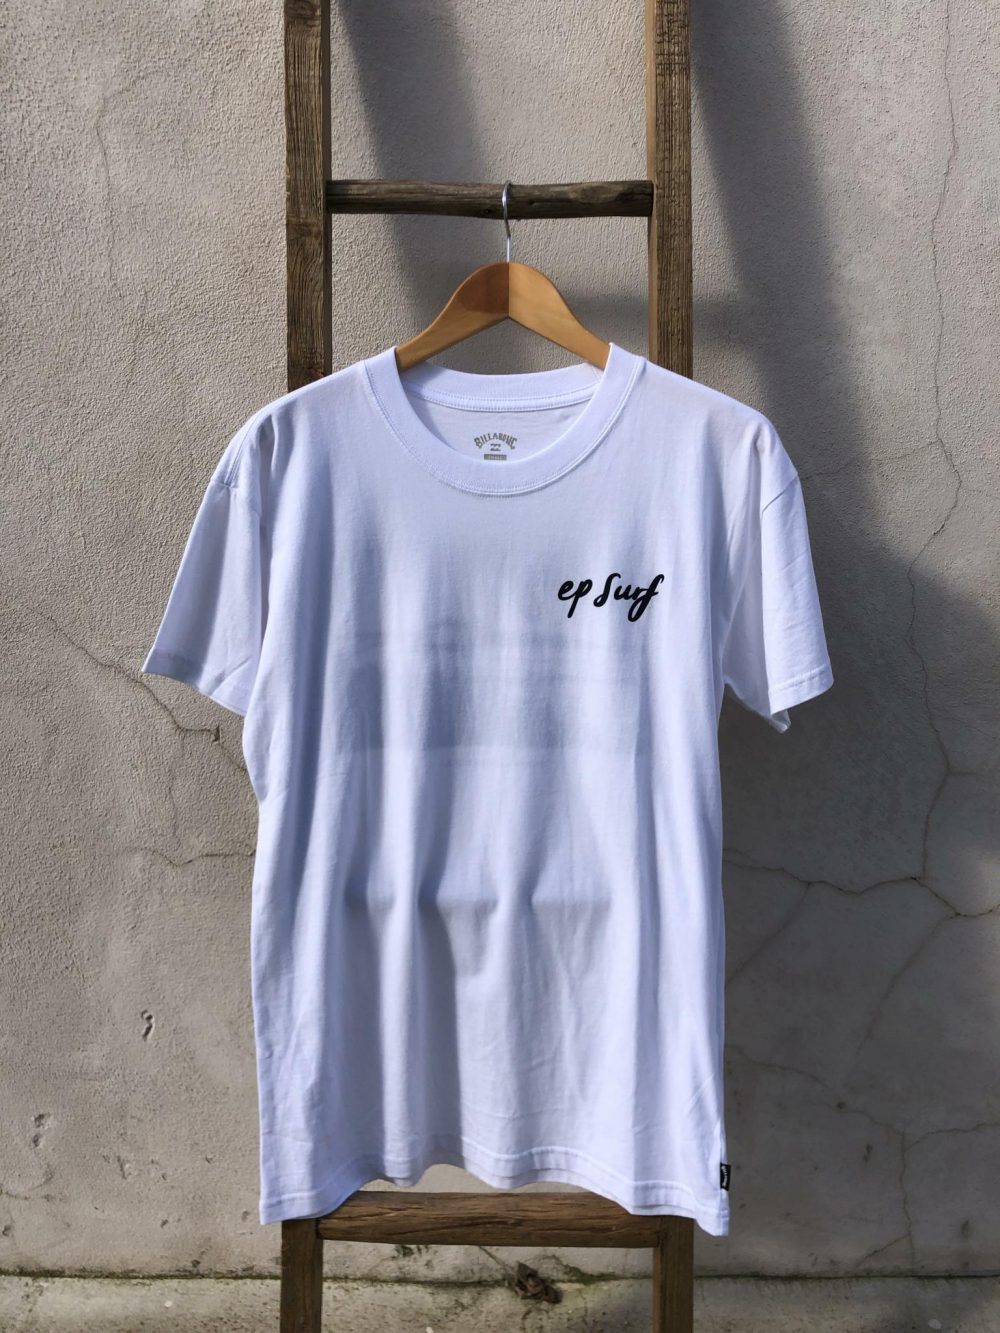 EPTMJETTY White/black Ep Surf Ep Tee M Jetty Mens Tops Clothing Clothing